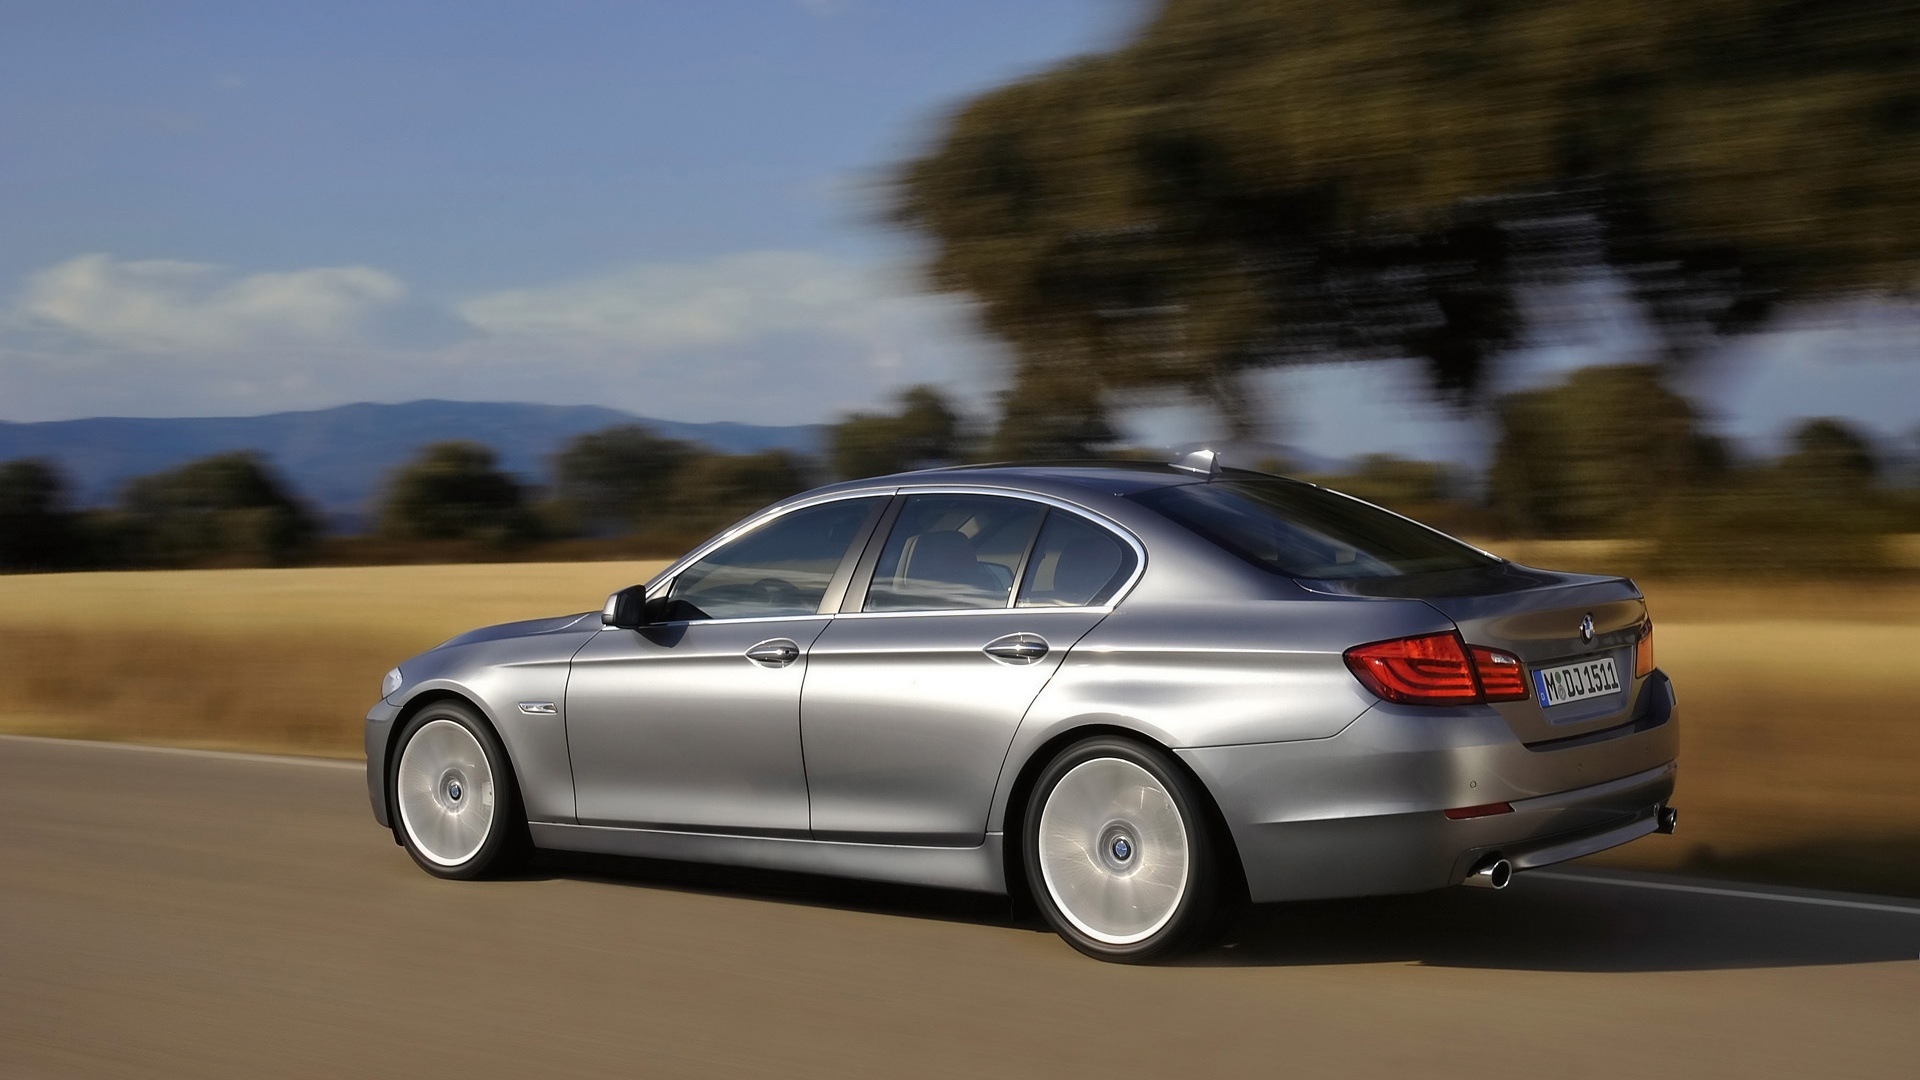 BMW 5 Series Sedan 2010 Rear And Side Speed for 1920 x 1080 HDTV 1080p resolution